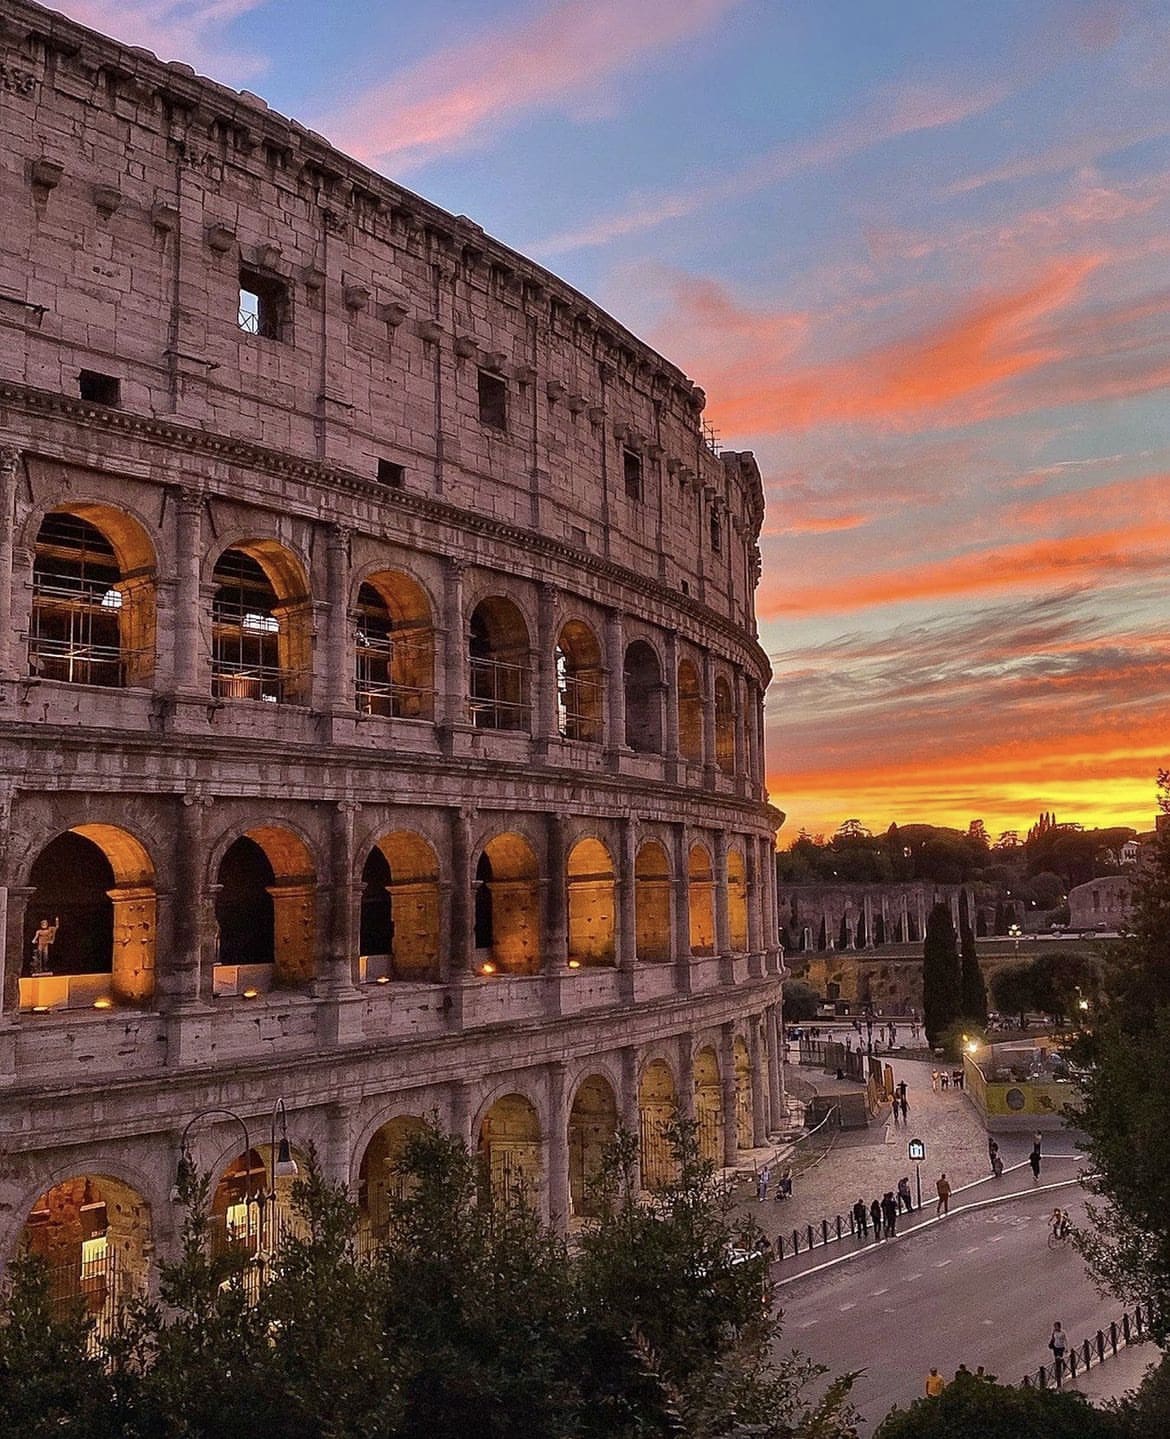 The colosseum at sunset - 12 Of The Best City Breaks in Europe